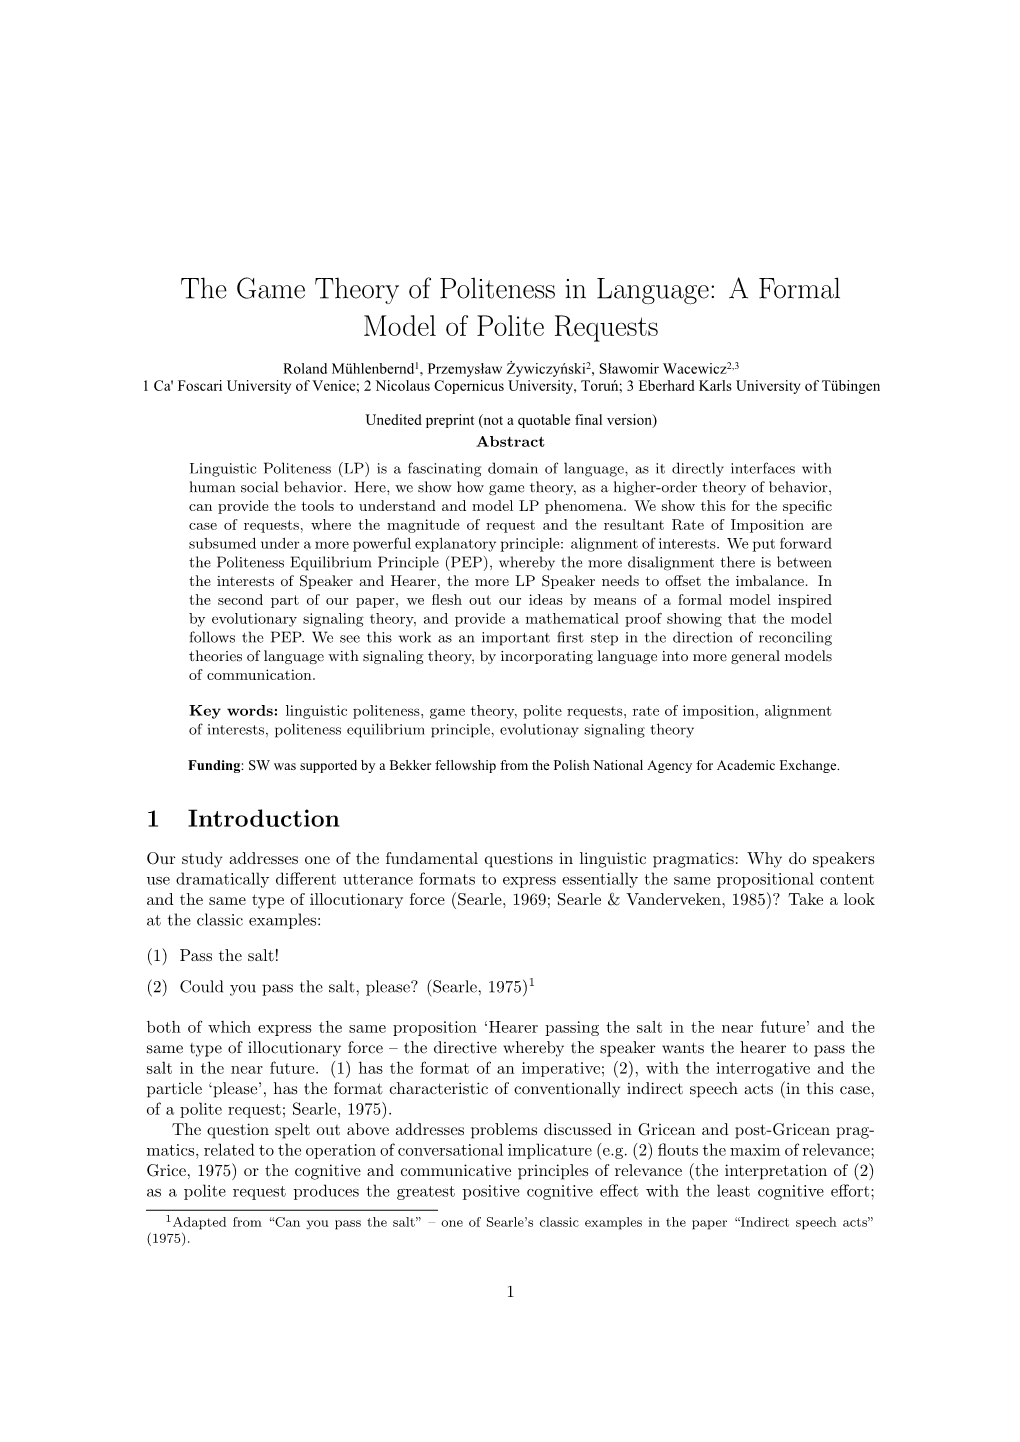 The Game Theory of Politeness in Language: a Formal Model of Polite Requests